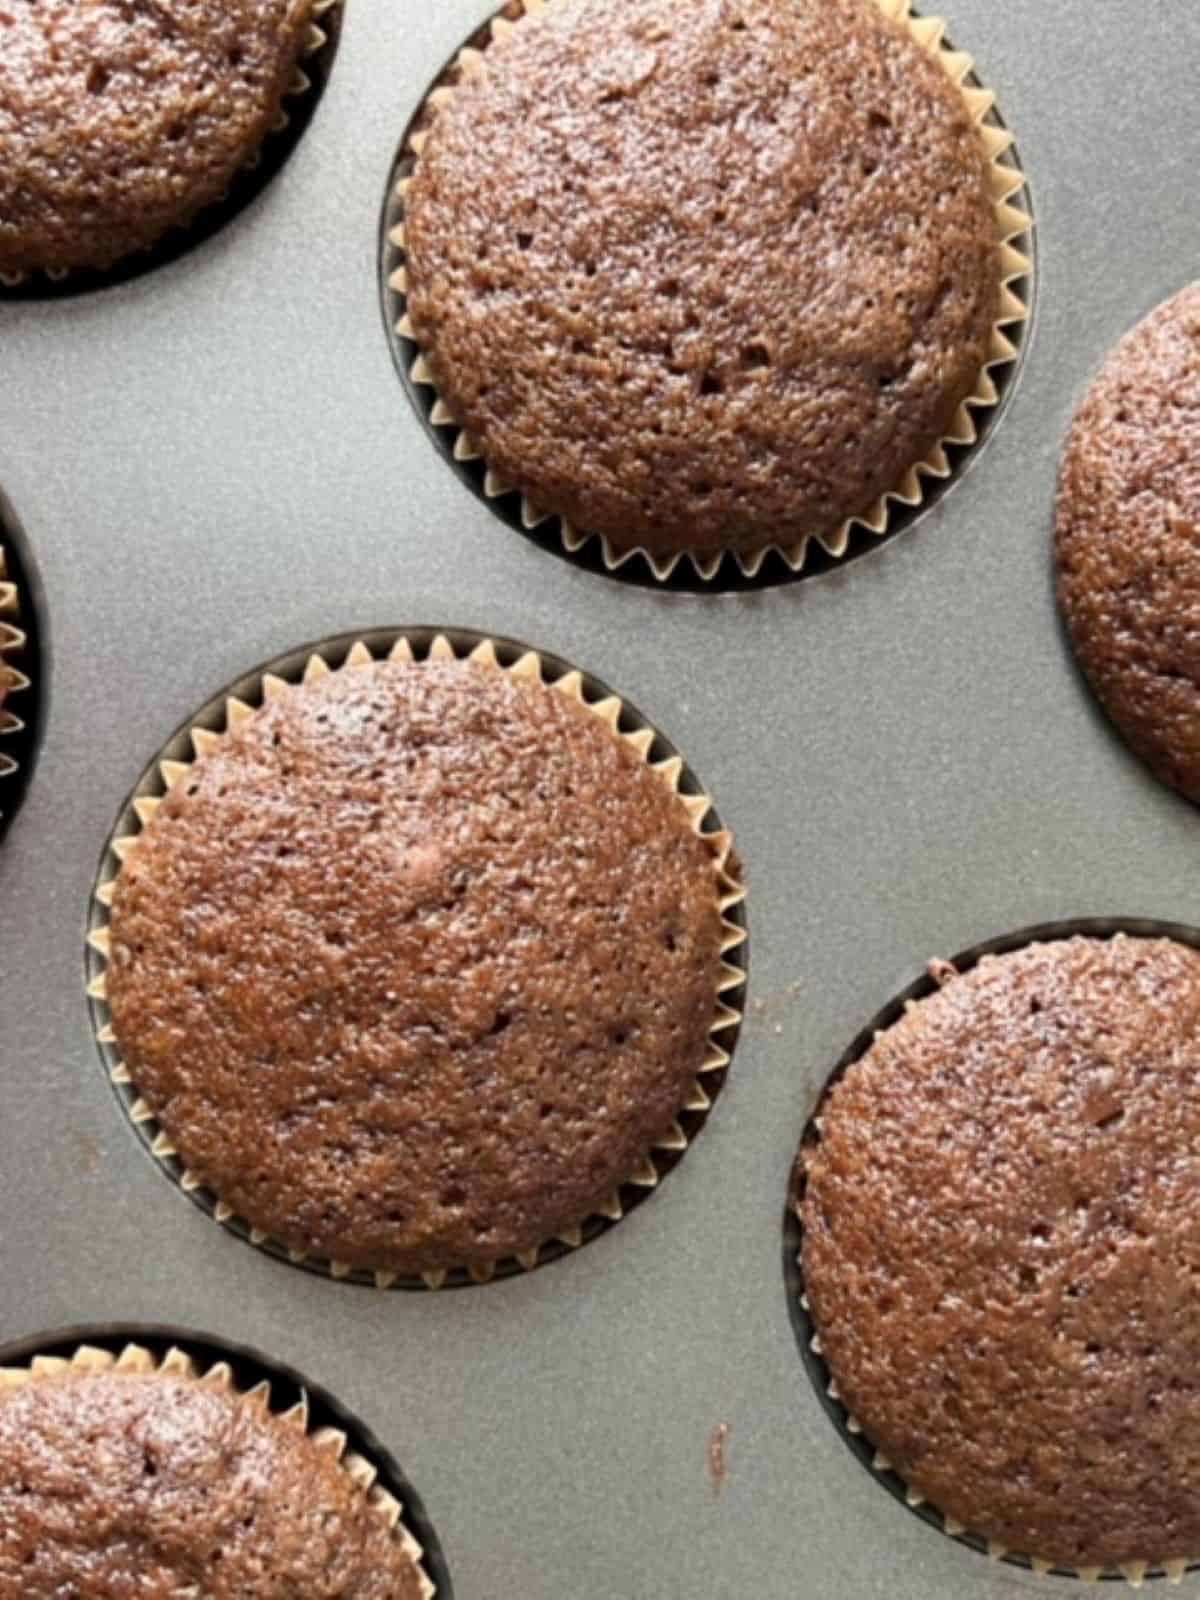 Two whole and five partial chocolate cupcakes in a lined muffin tin.